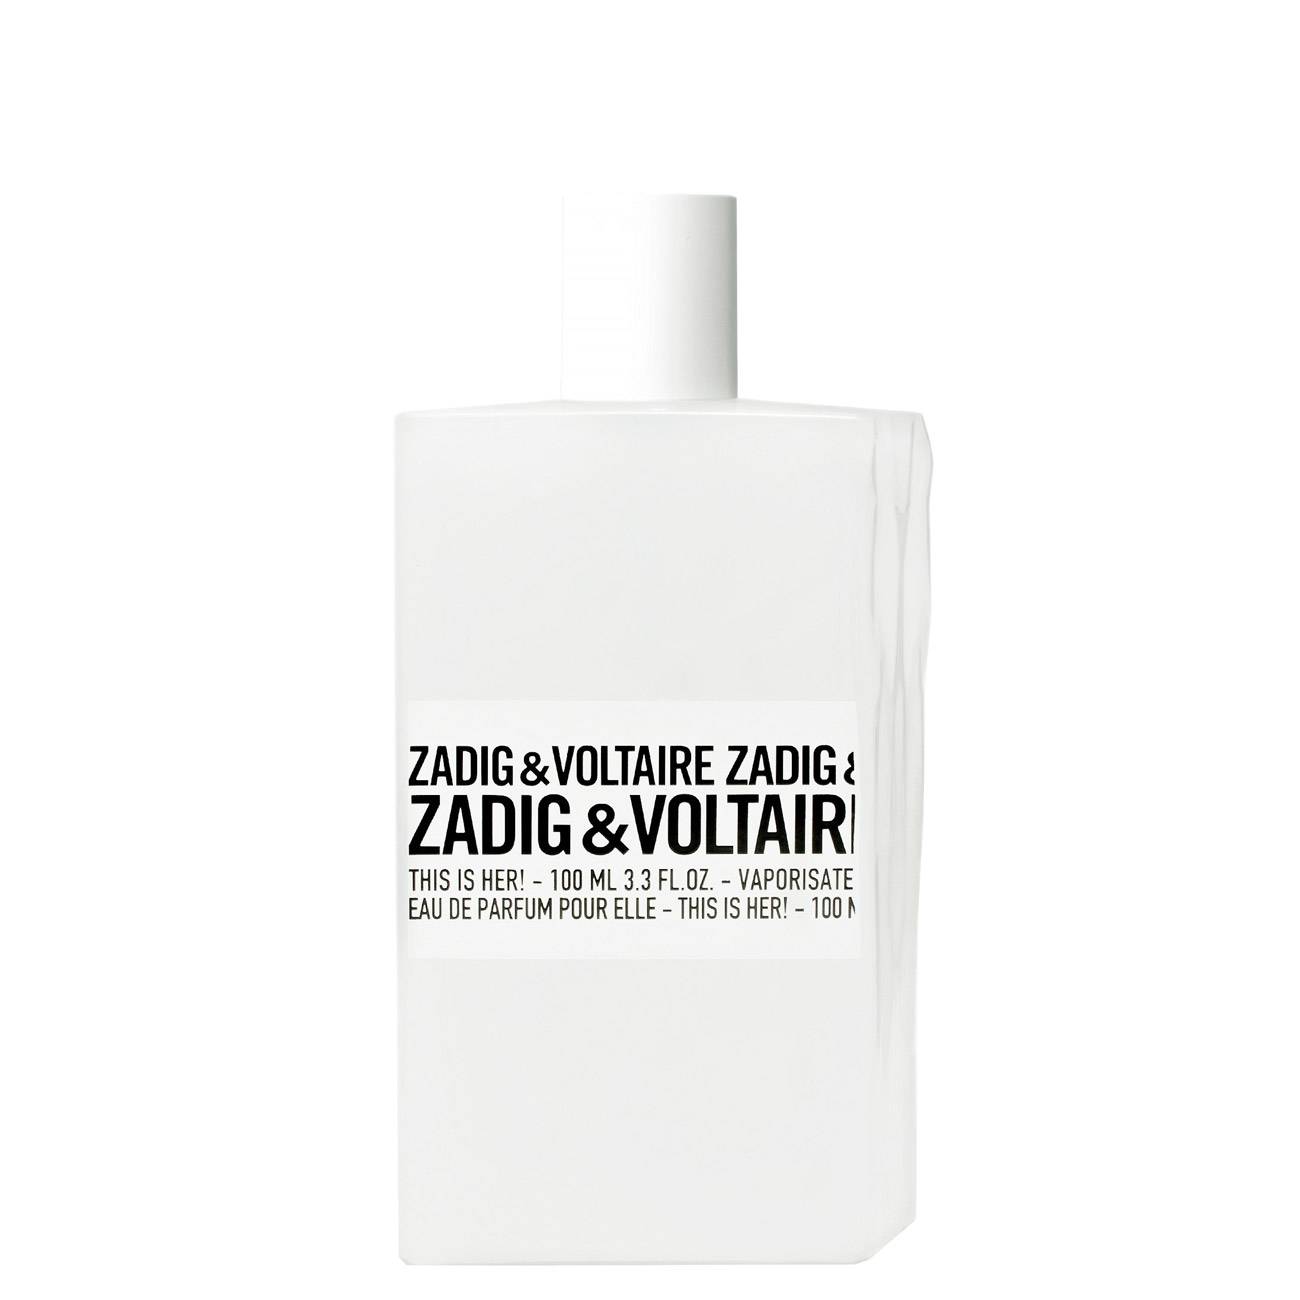 THIS IS HER! 100ml poza